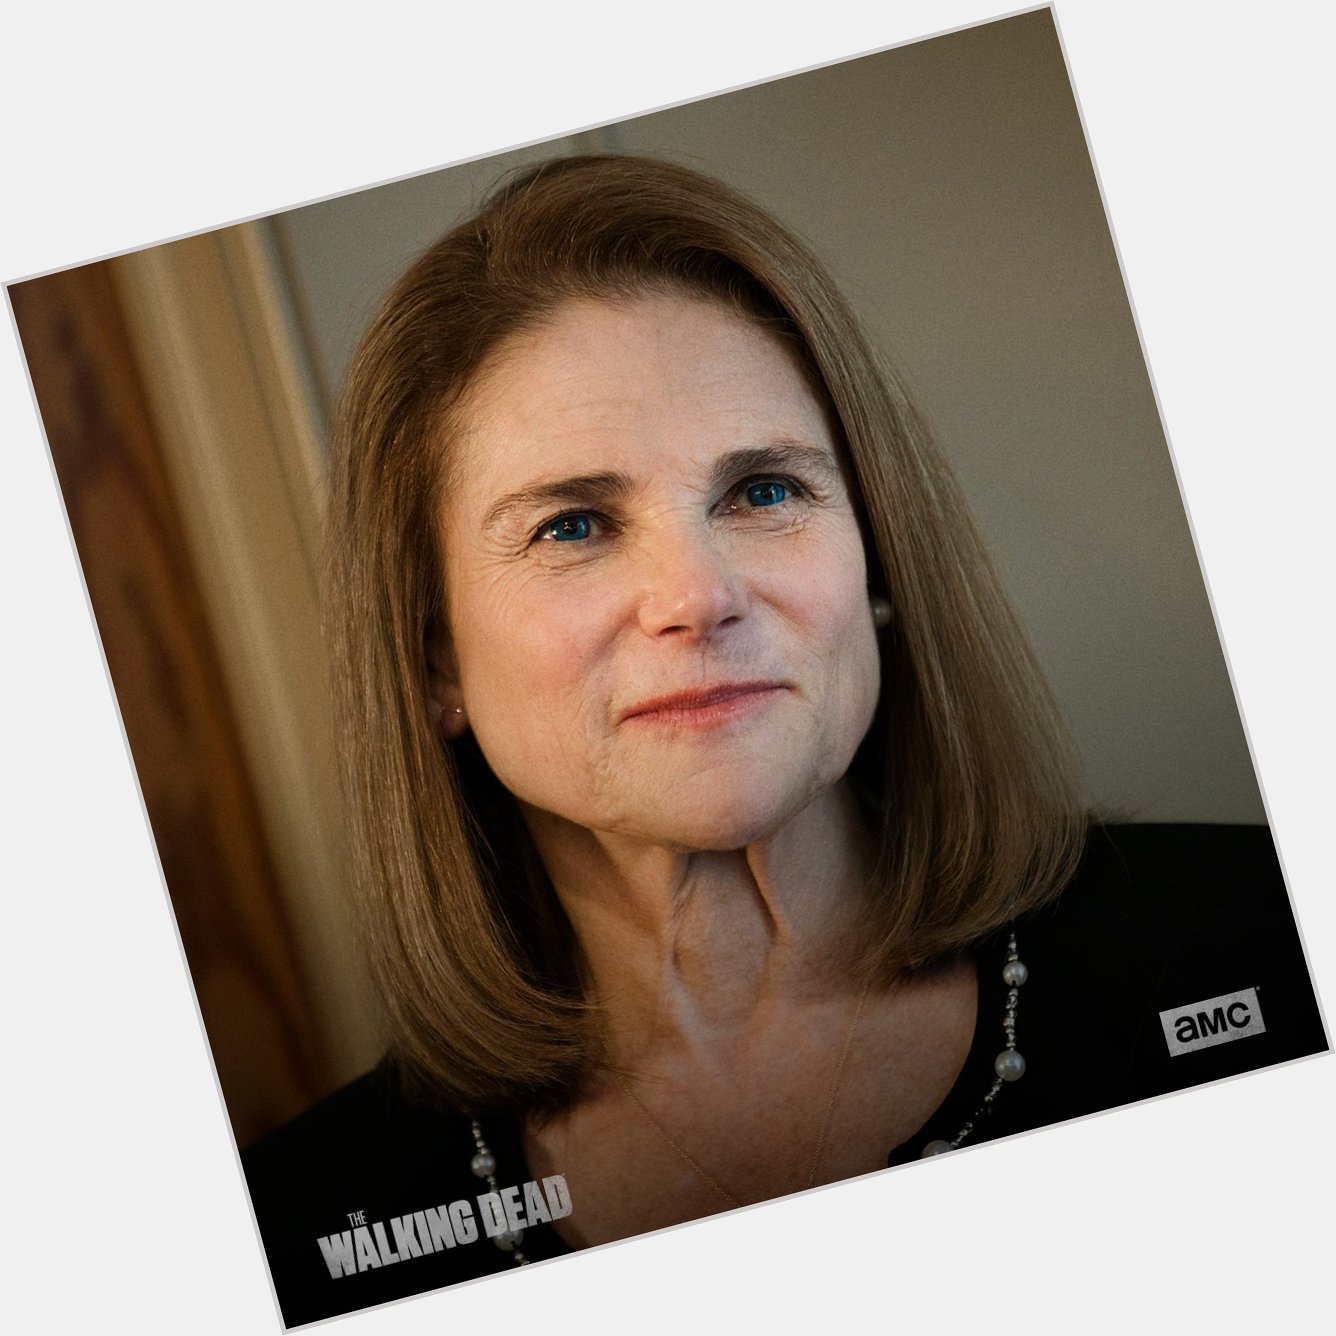 Happy birthday to our favorite former-congresswoman-turned-safe-zone-leader, Tovah Feldshuh. 